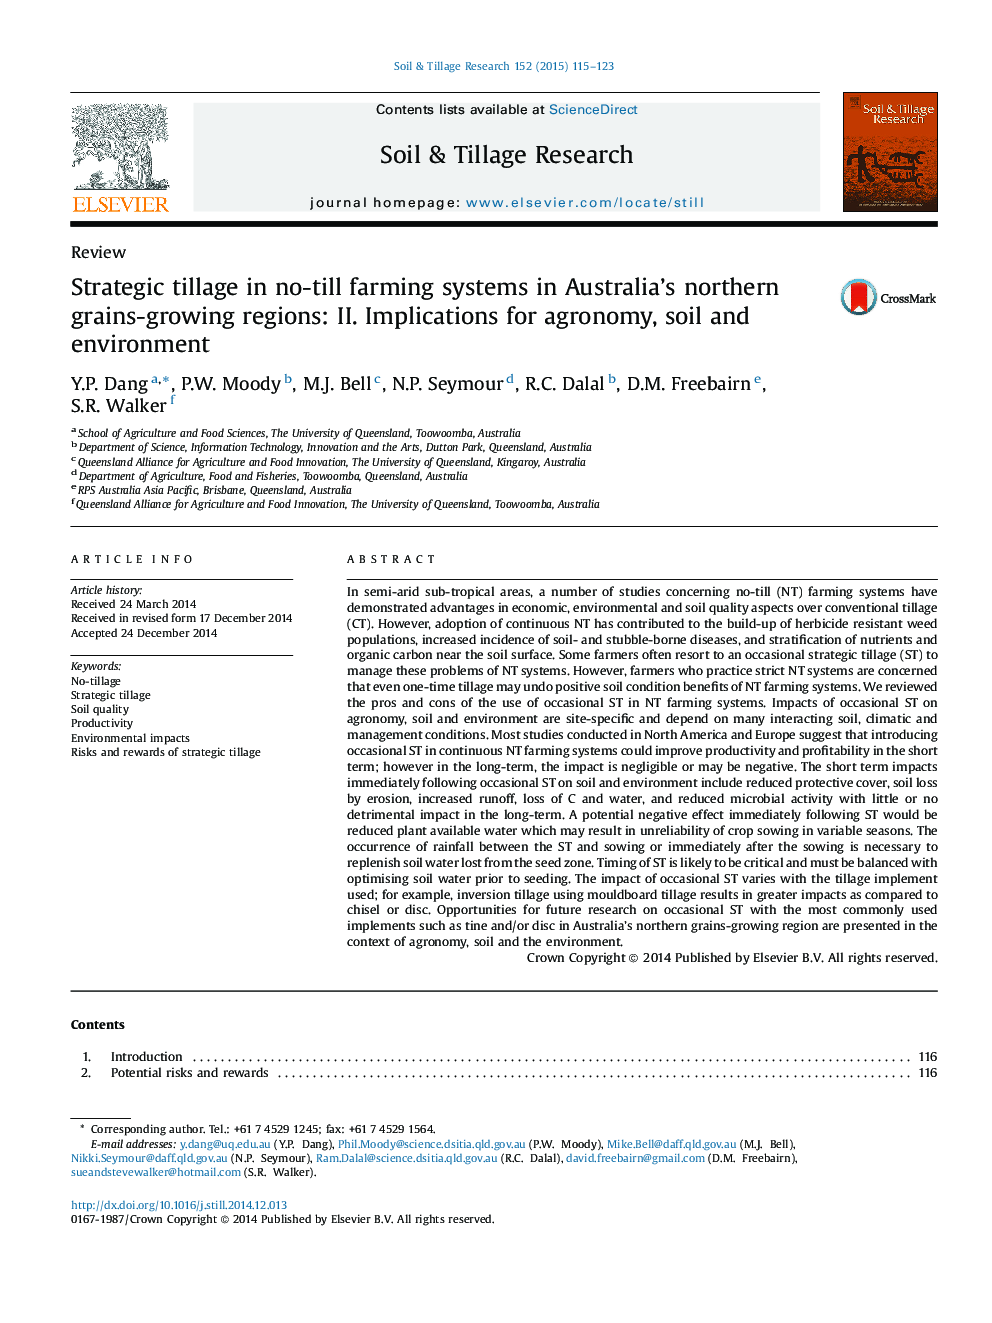 Strategic tillage in no-till farming systems in Australia’s northern grains-growing regions: II. Implications for agronomy, soil and environment